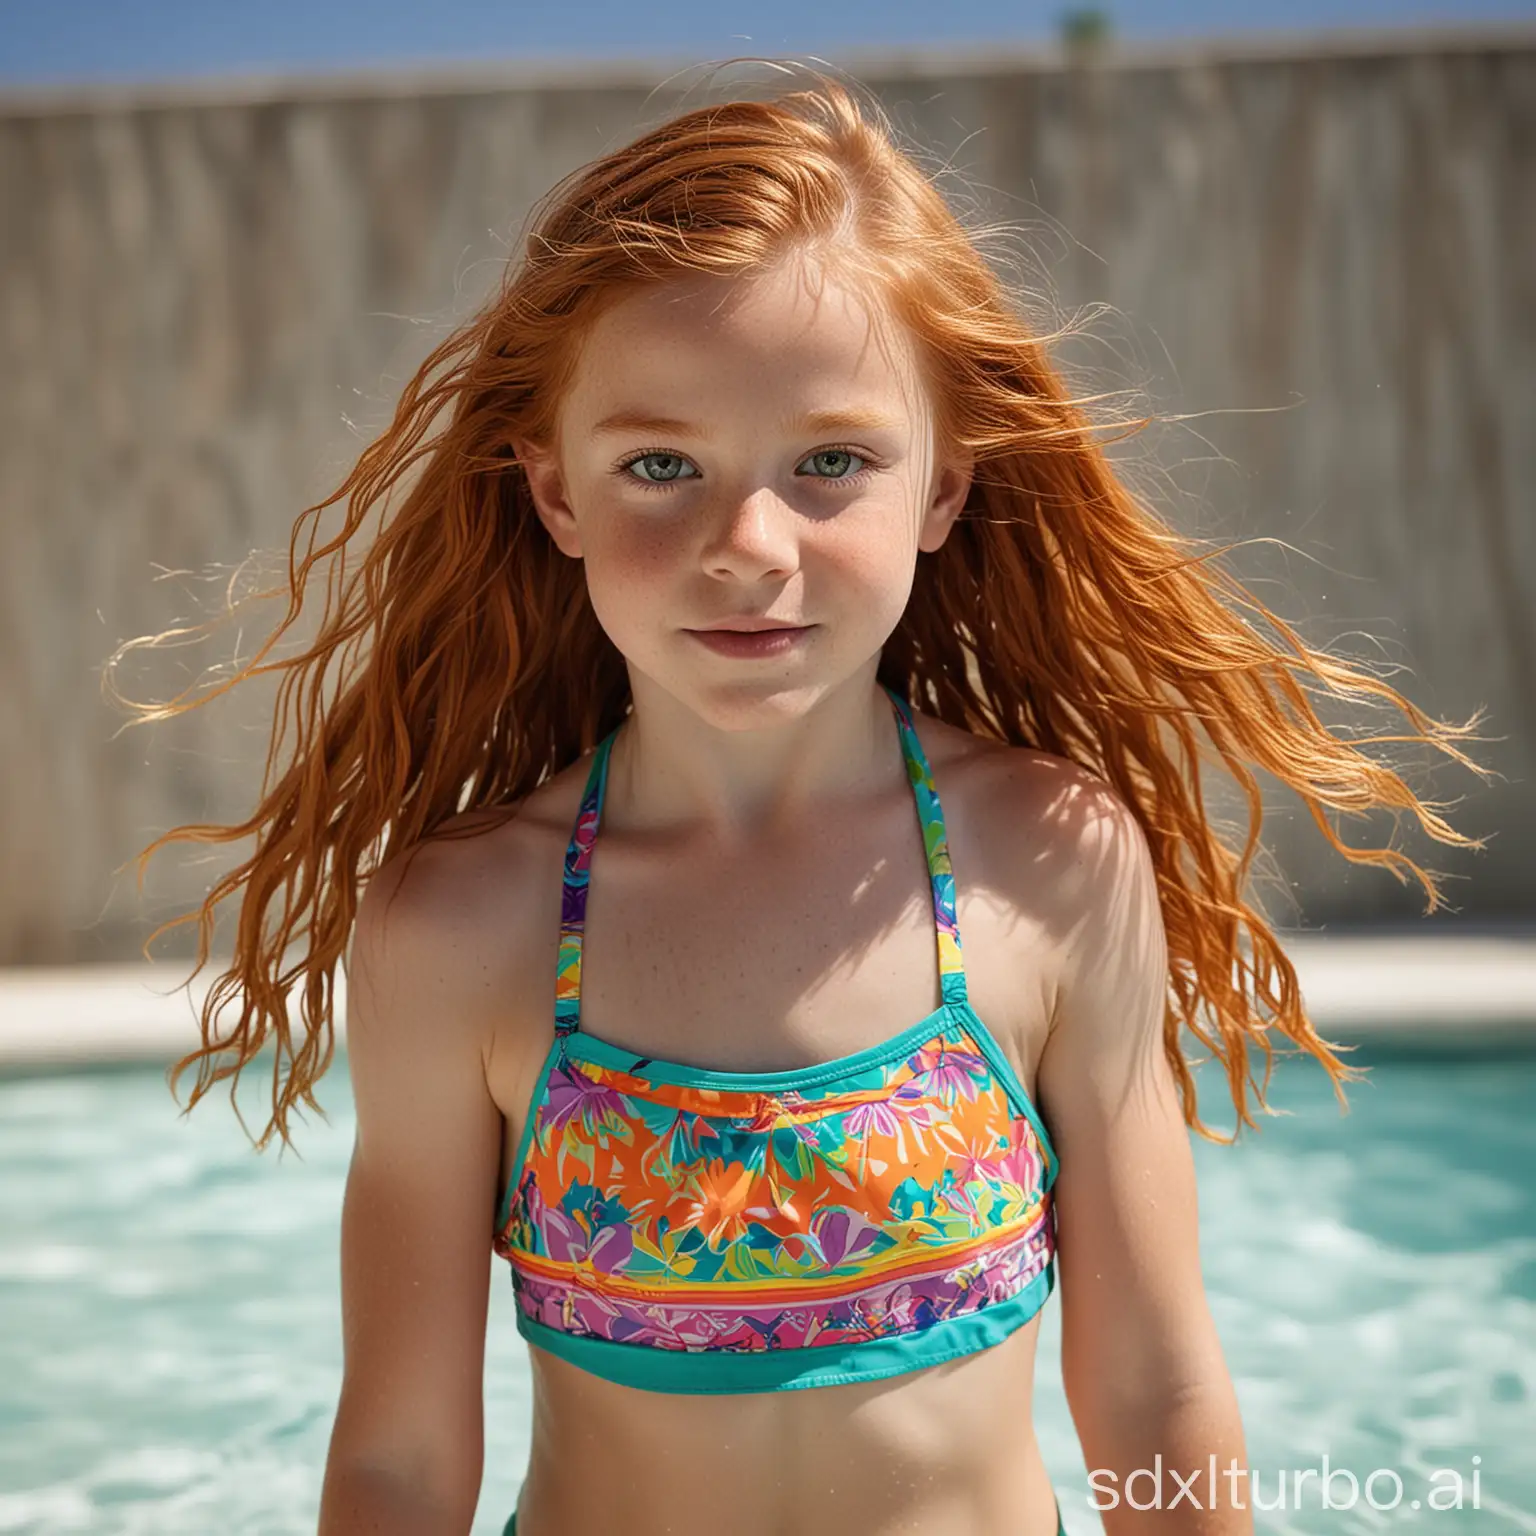 Muscular 8YearOld Girl with Long Ginger Hair and Green Eyes in Vibrant Bathing Suit